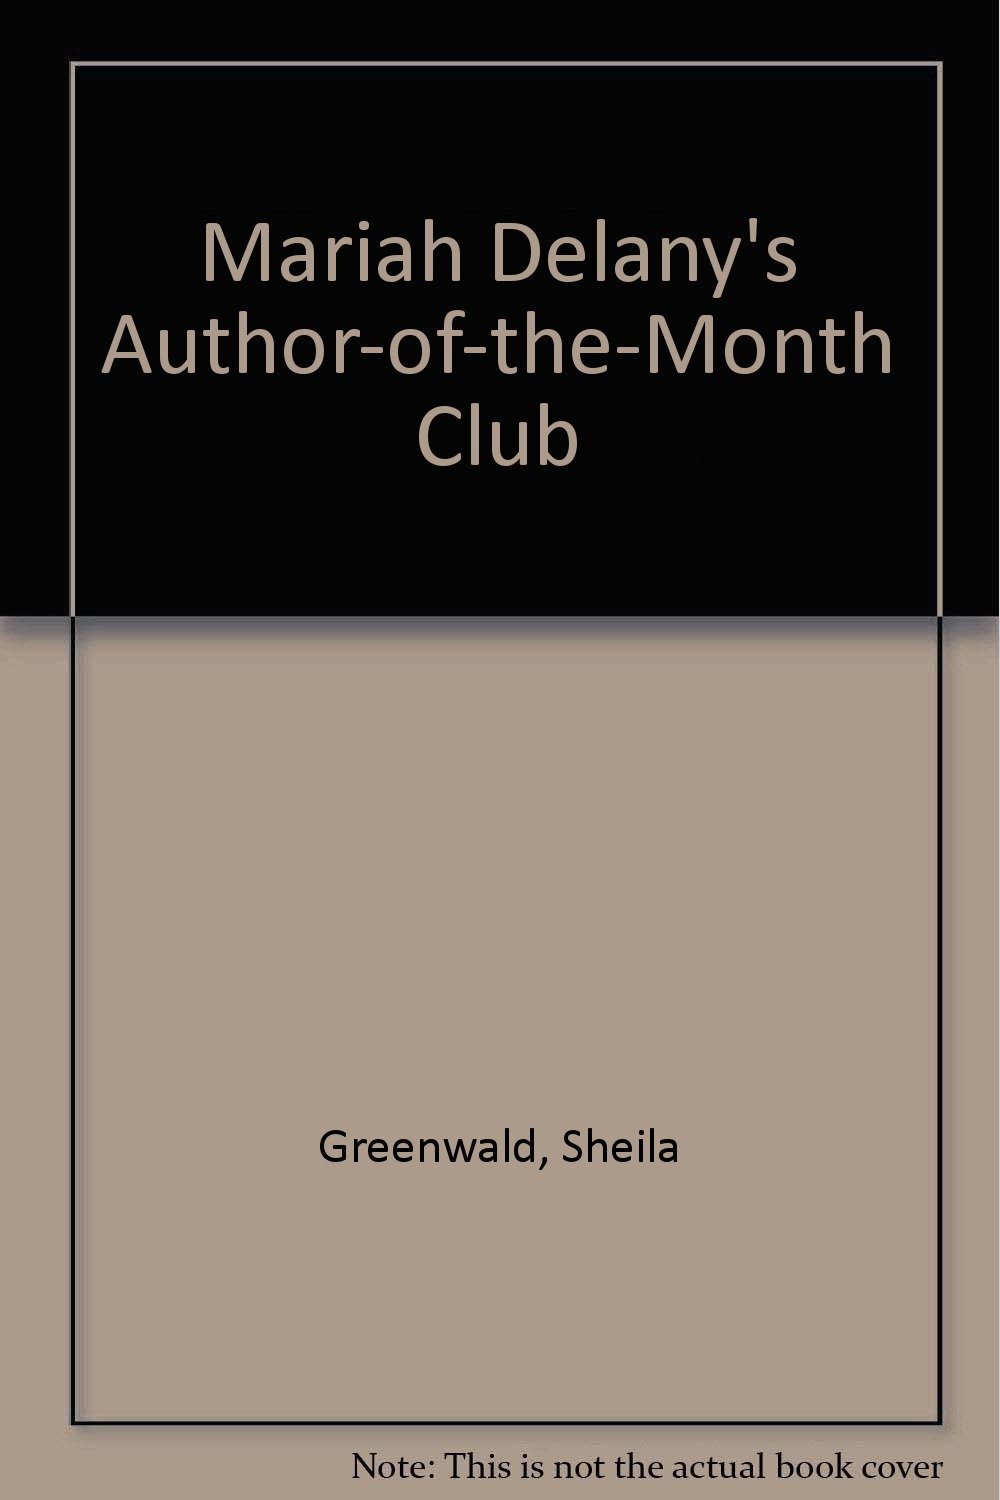 Mariah Delany's author-of-the-month club magazine reviews